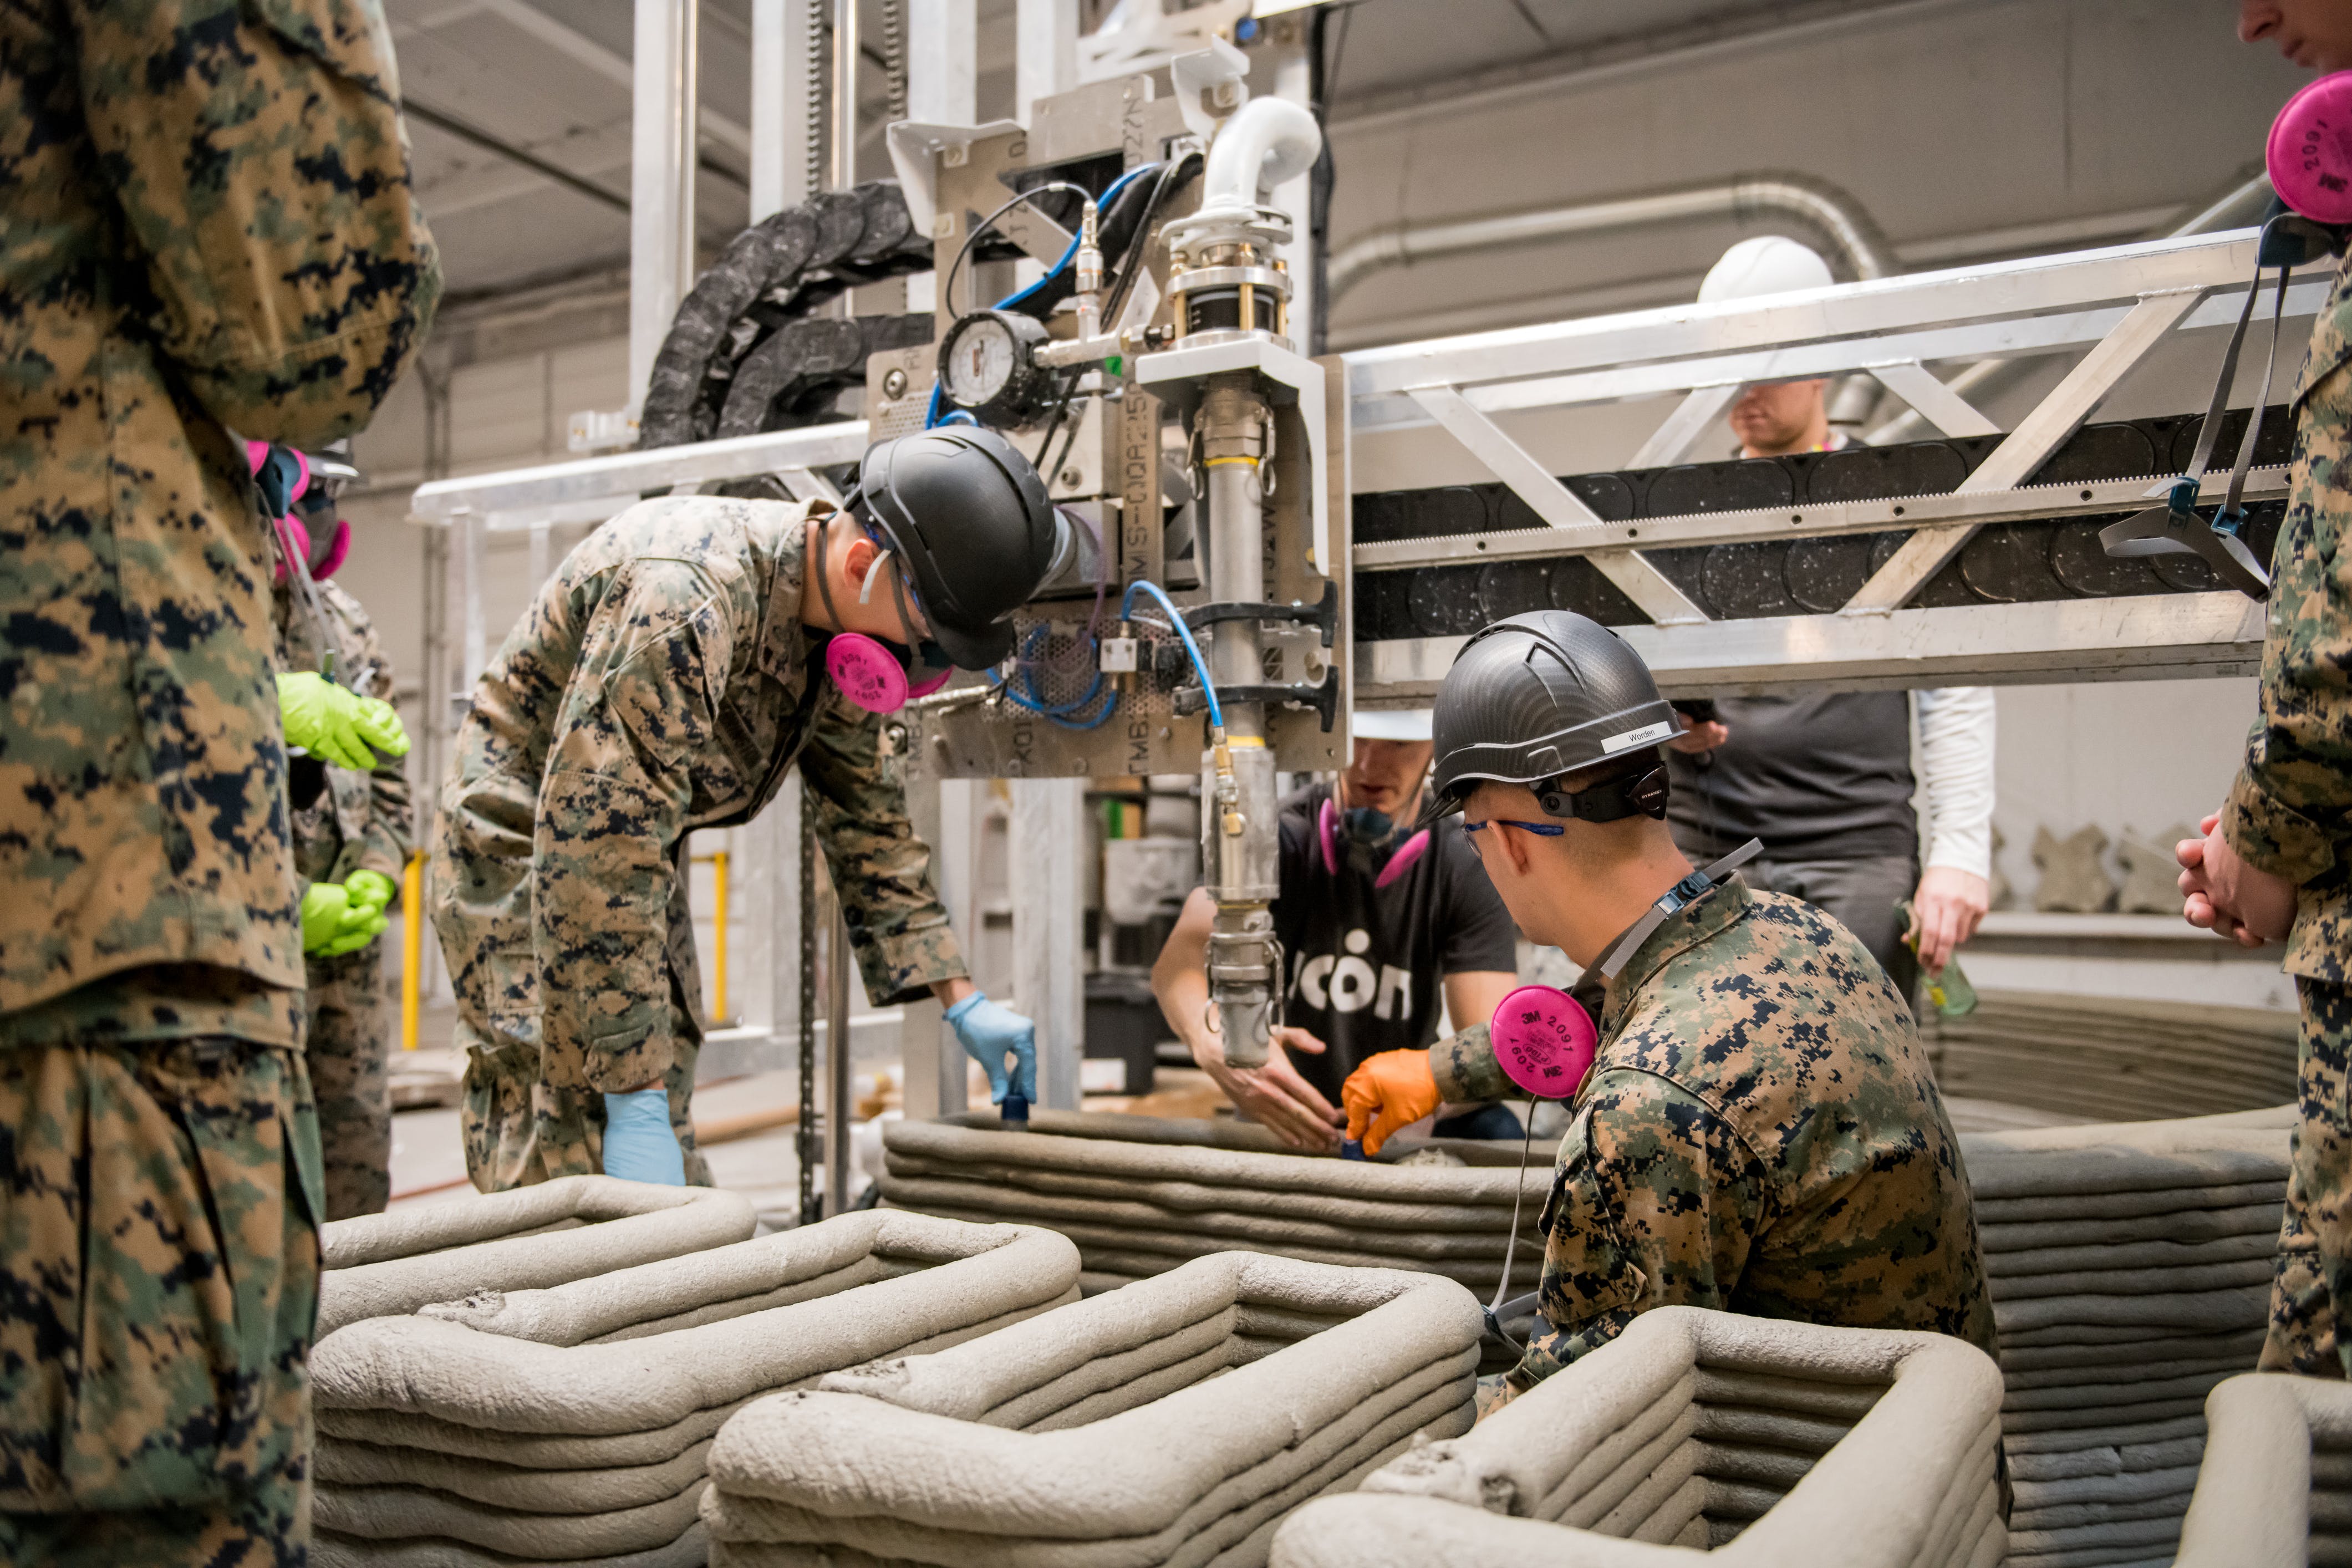 The US marines (pictured) led the printing process, under the observation of the ICON's team. Photo via ICON.